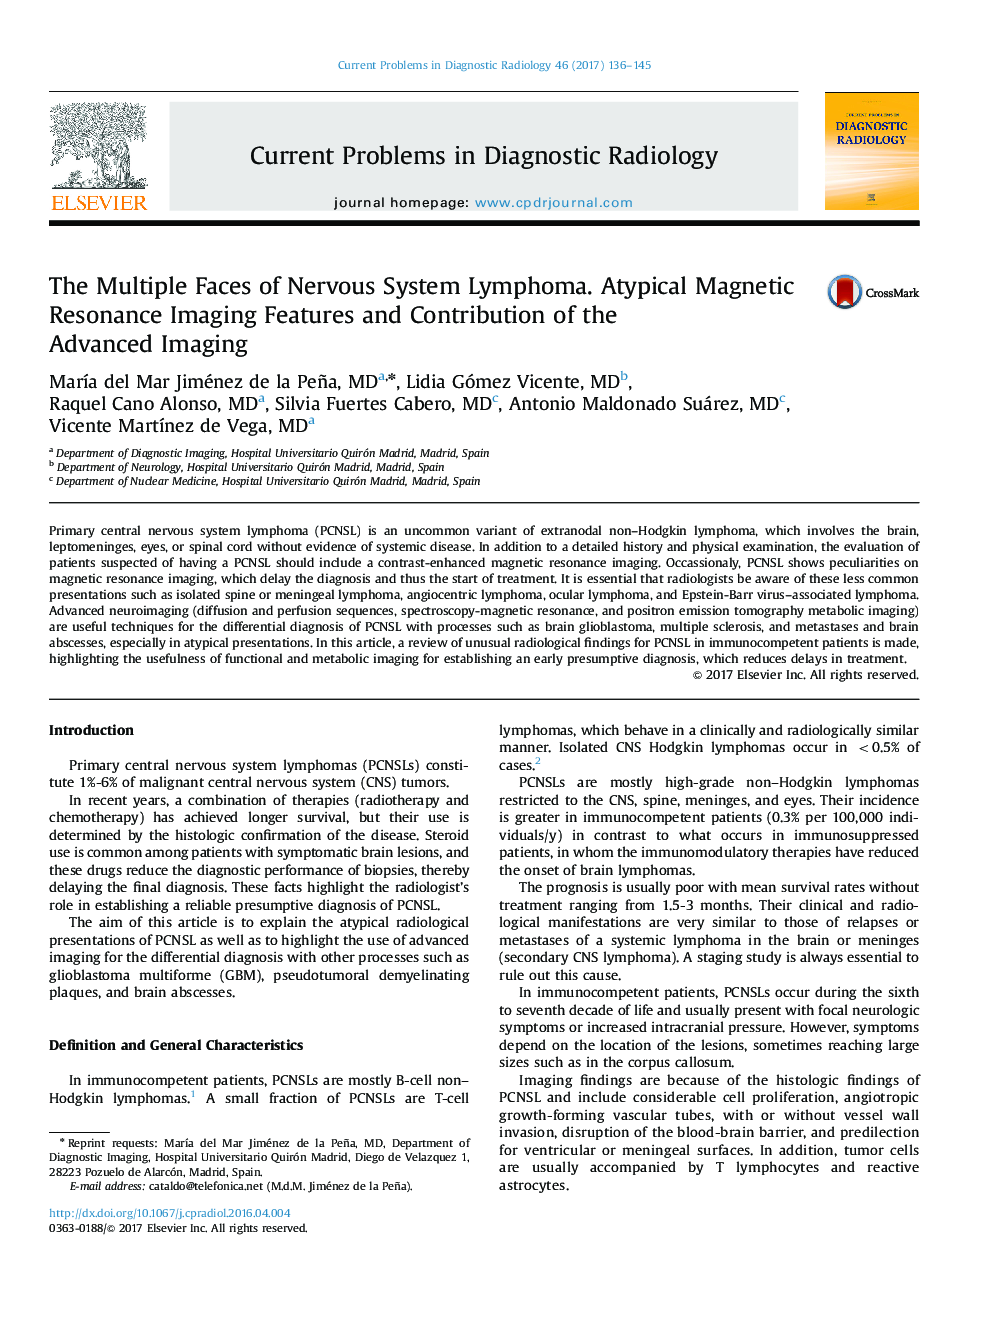 The Multiple Faces of Nervous System Lymphoma. Atypical Magnetic Resonance Imaging Features and Contribution of the Advanced Imaging